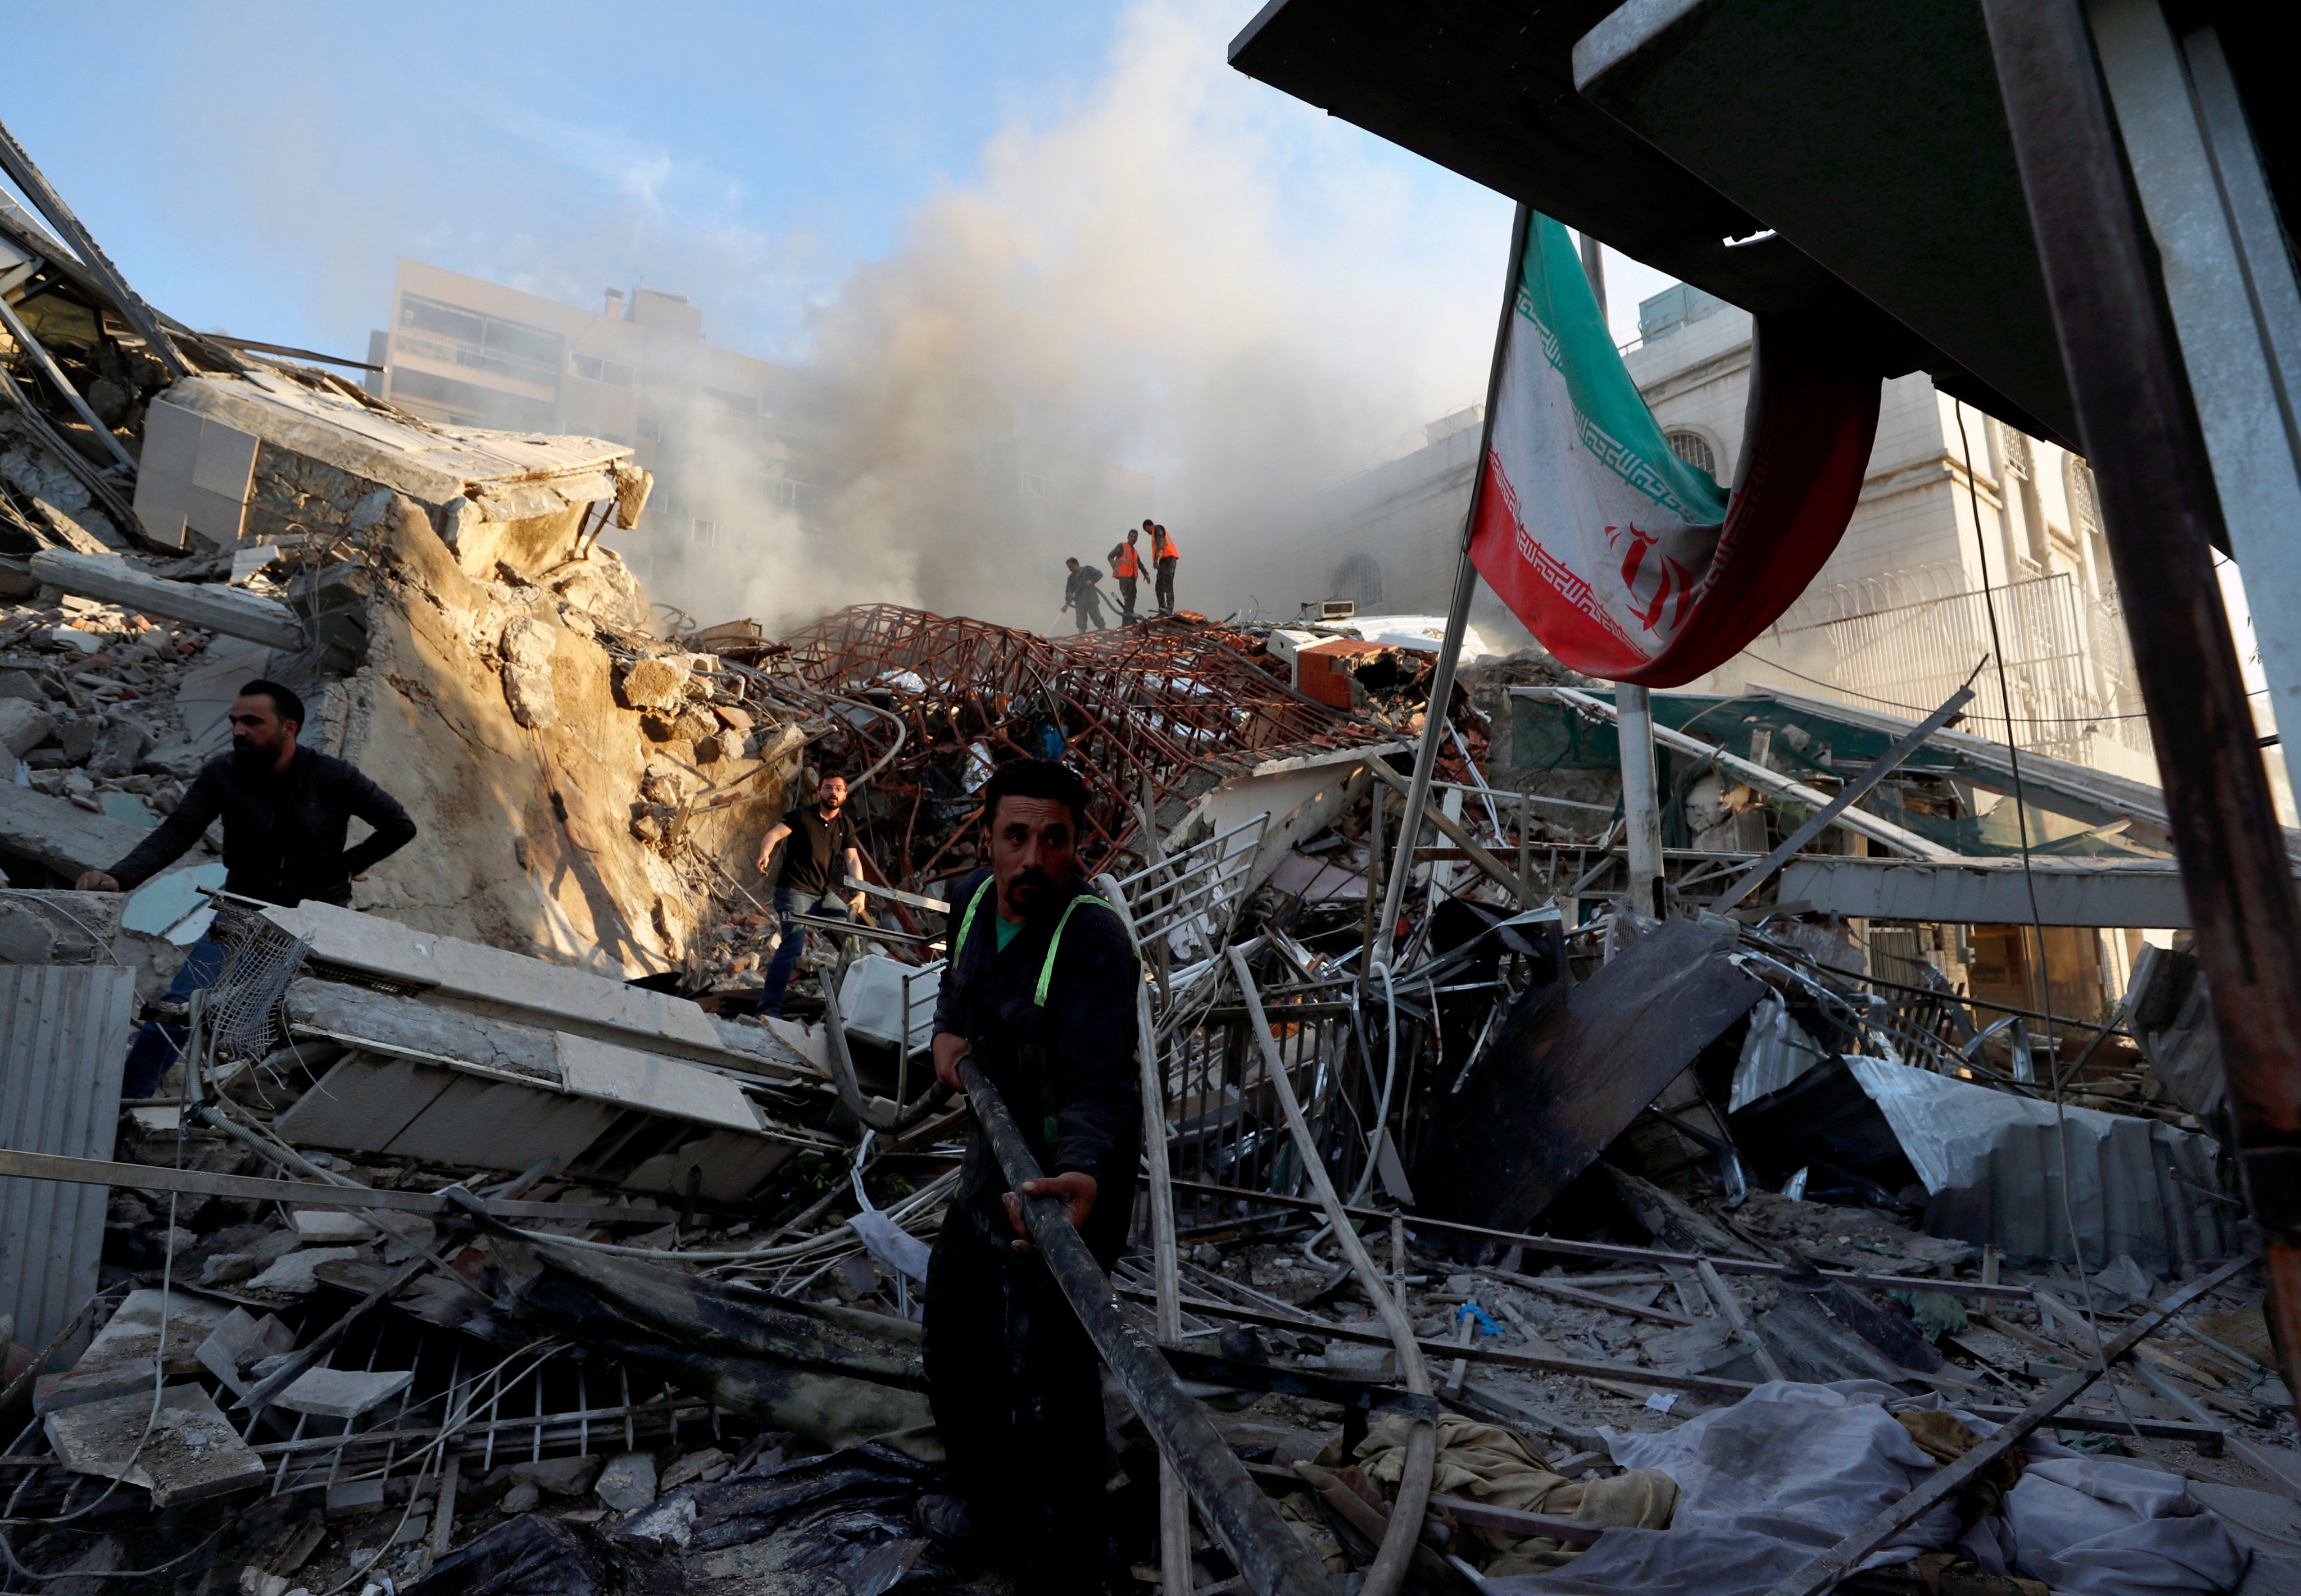 On April 1, an air strike demolished Iran’s consulate in Damascus. Both countries accused Israel of carrying out the attack. Photo: AP